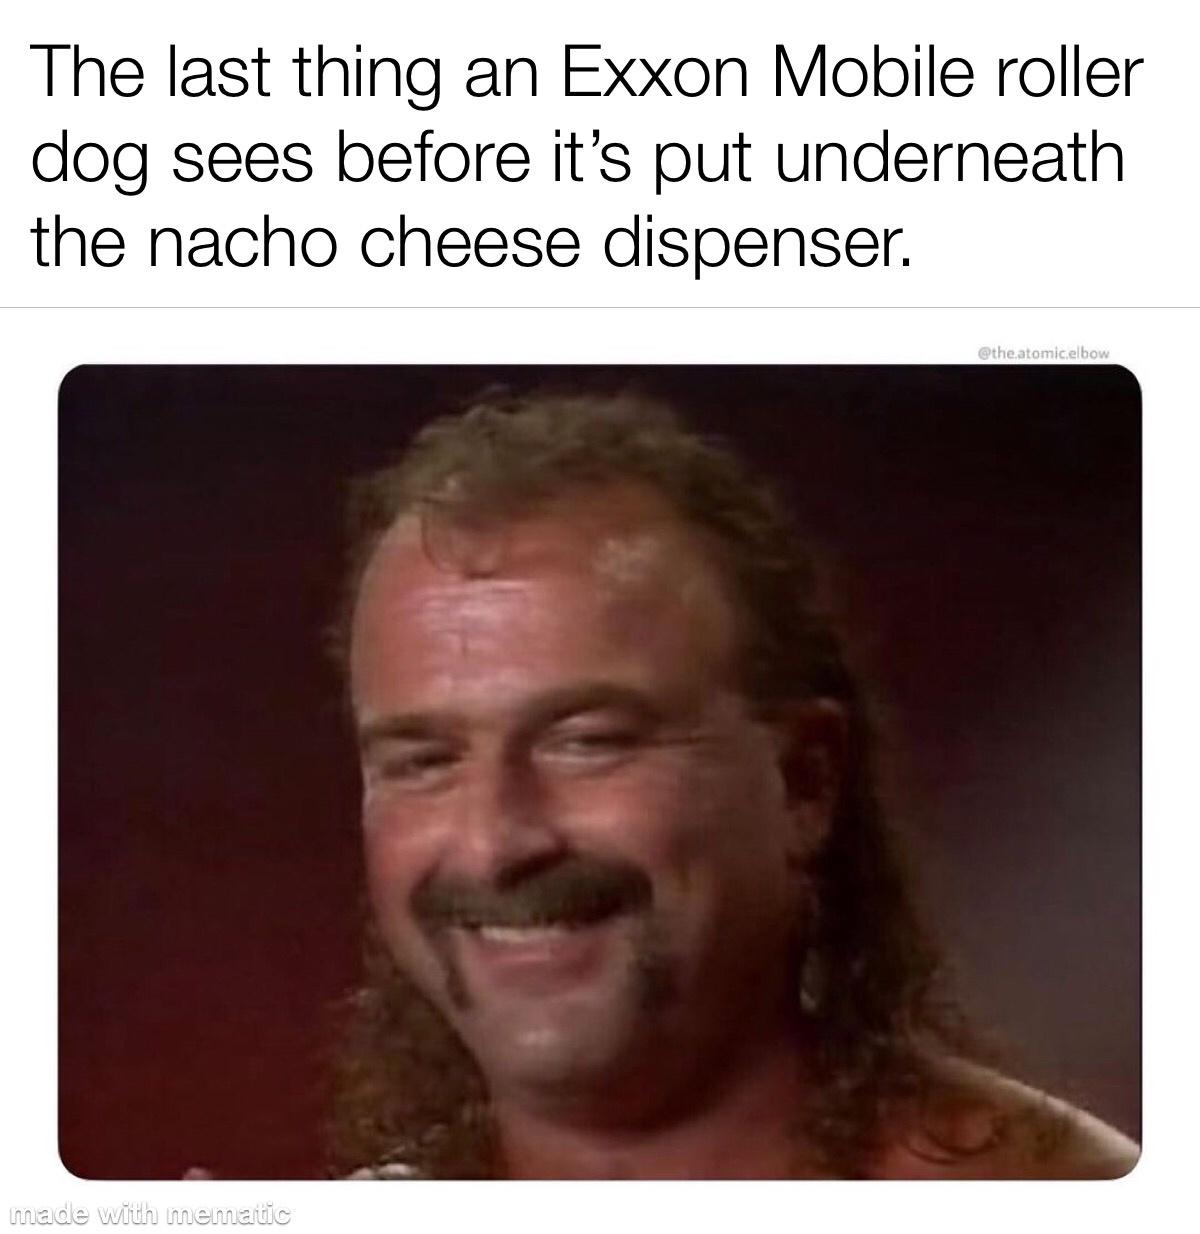 photo caption - The last thing an Exxon Mobile roller dog sees before it's put underneath the nacho cheese dispenser. atomic elbow made with mematic